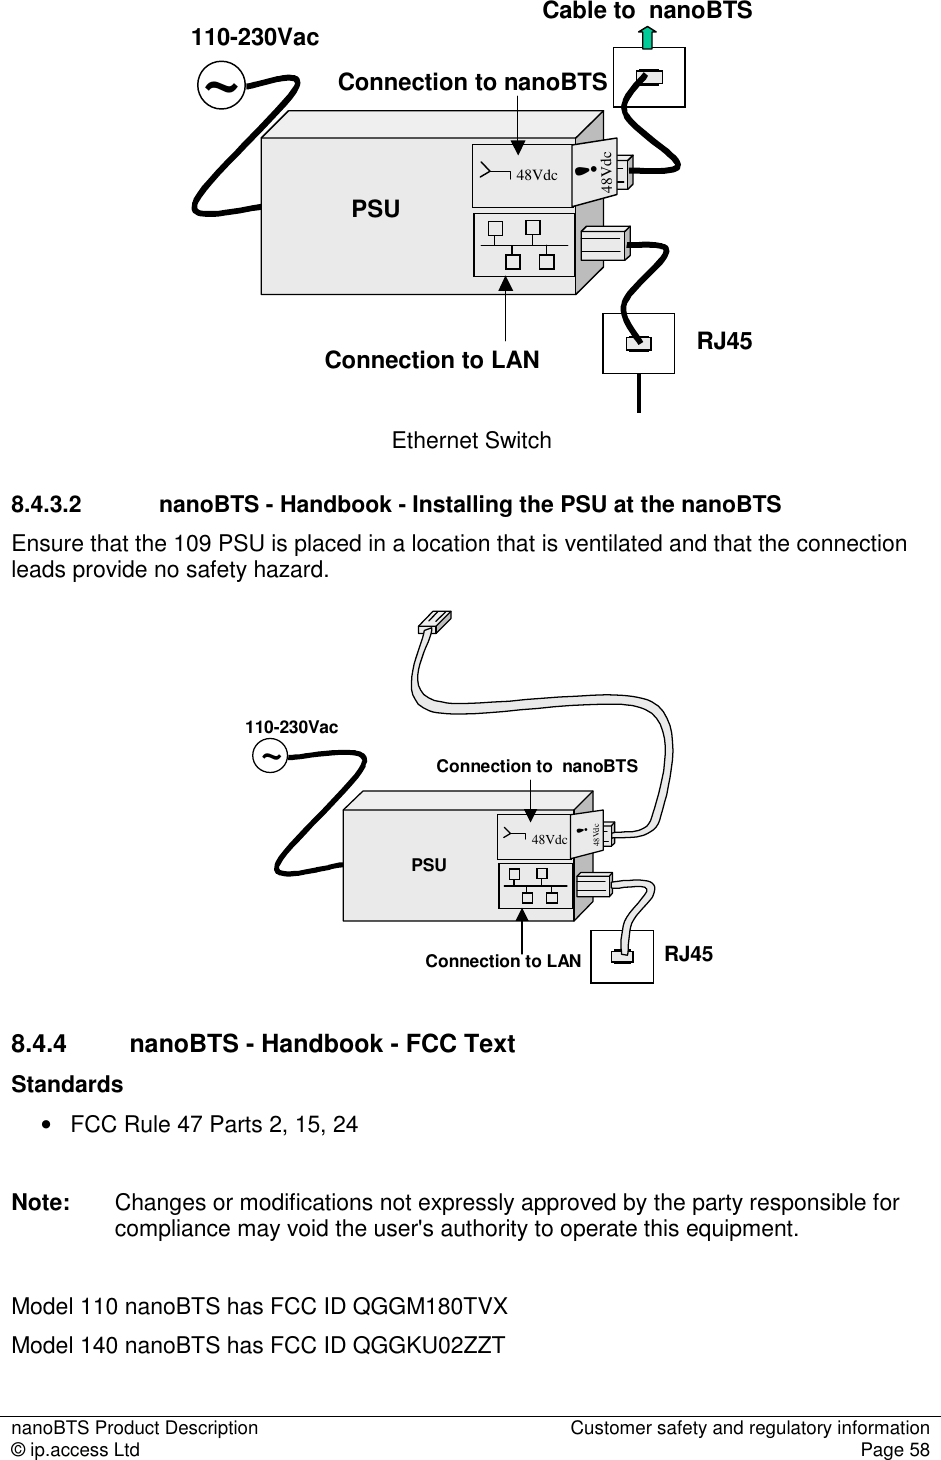 nanoBTS Product Description  Customer safety and regulatory information © ip.access Ltd  Page 58  ~PSU48Vdc48Vdc!110-230VacRJ45Connection to LANConnection to nanoBTSCable to  nanoBTS Ethernet Switch 8.4.3.2  nanoBTS - Handbook - Installing the PSU at the nanoBTS Ensure that the 109 PSU is placed in a location that is ventilated and that the connection leads provide no safety hazard. RJ45Connection to LAN~PSU48Vdc48Vdc!110-230VacConnection to  nanoBTS 8.4.4  nanoBTS - Handbook - FCC Text Standards •  FCC Rule 47 Parts 2, 15, 24  Note:  Changes or modifications not expressly approved by the party responsible for compliance may void the user&apos;s authority to operate this equipment.  Model 110 nanoBTS has FCC ID QGGM180TVX Model 140 nanoBTS has FCC ID QGGKU02ZZT 